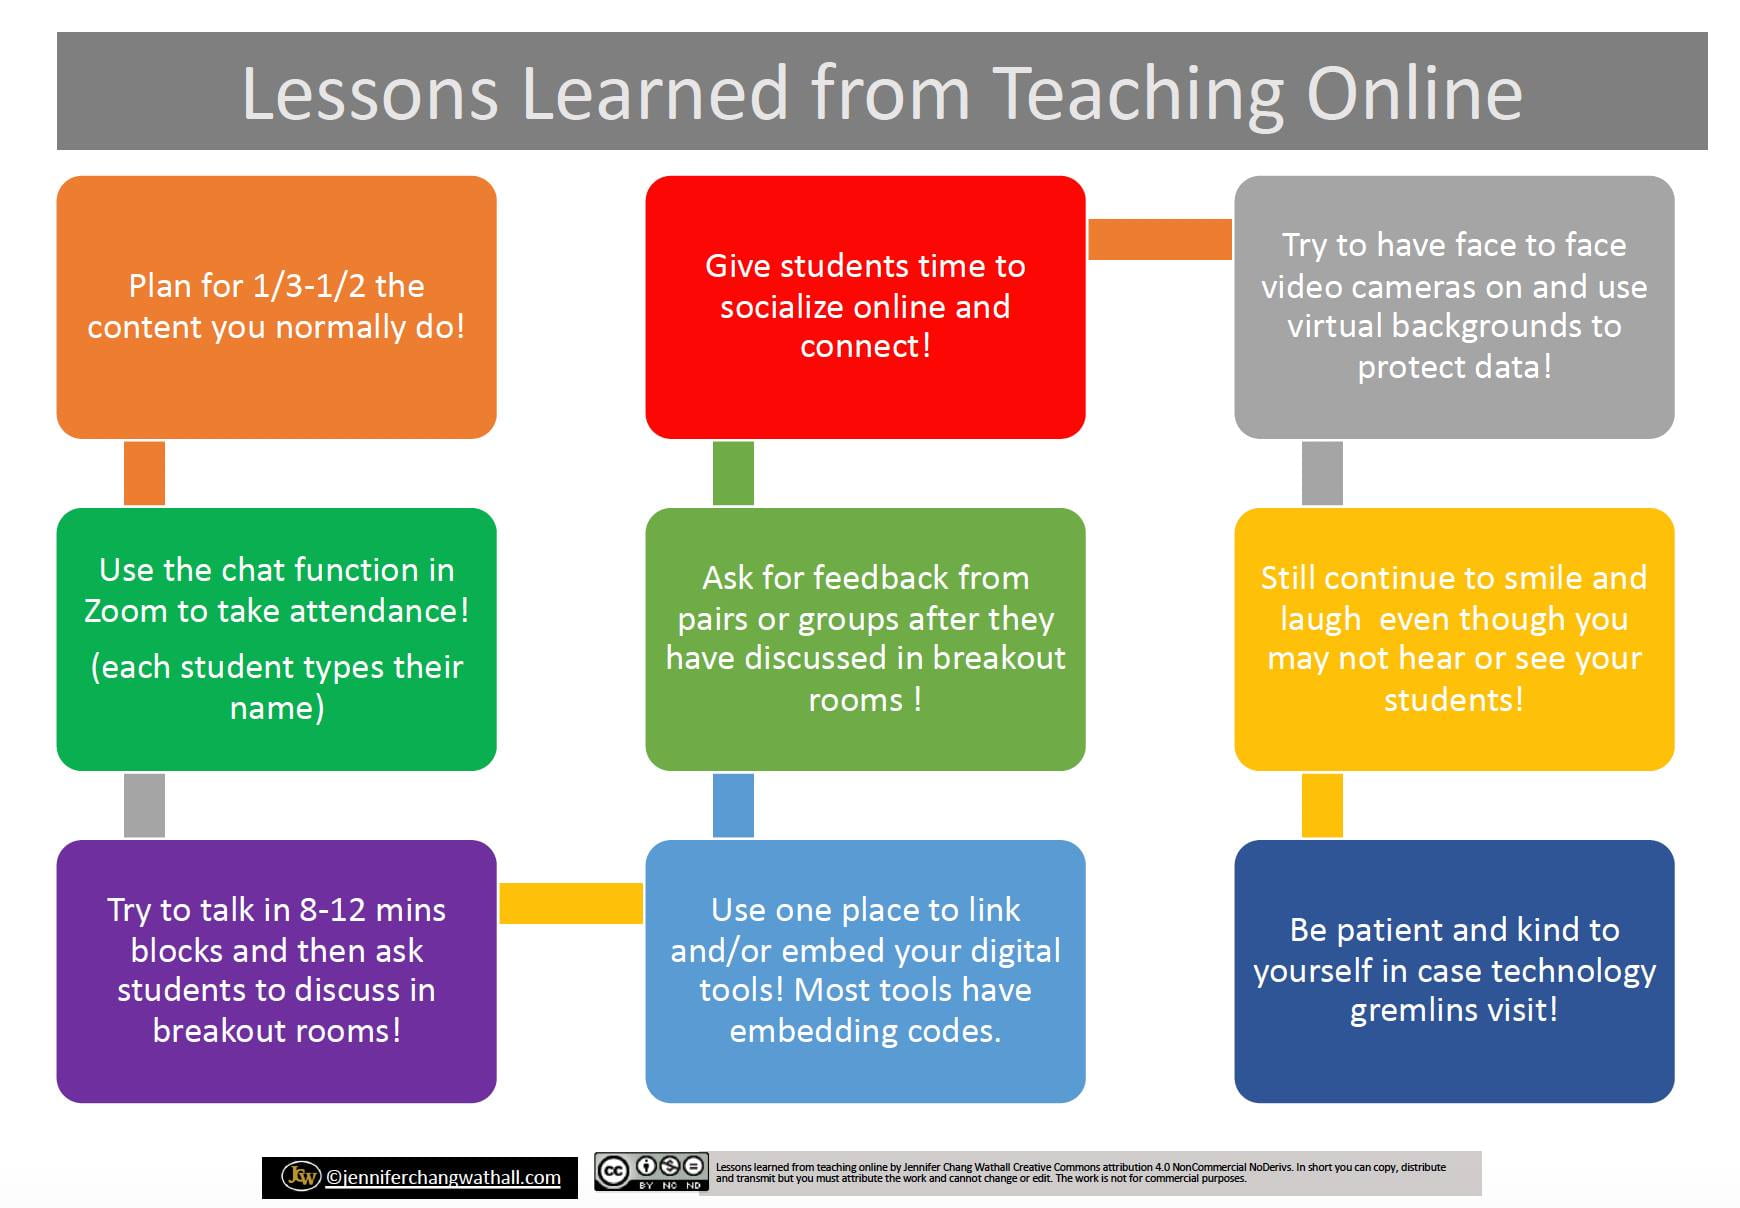 8 Strategies for Effective Online Teaching: Lessons from the Past 2 Years